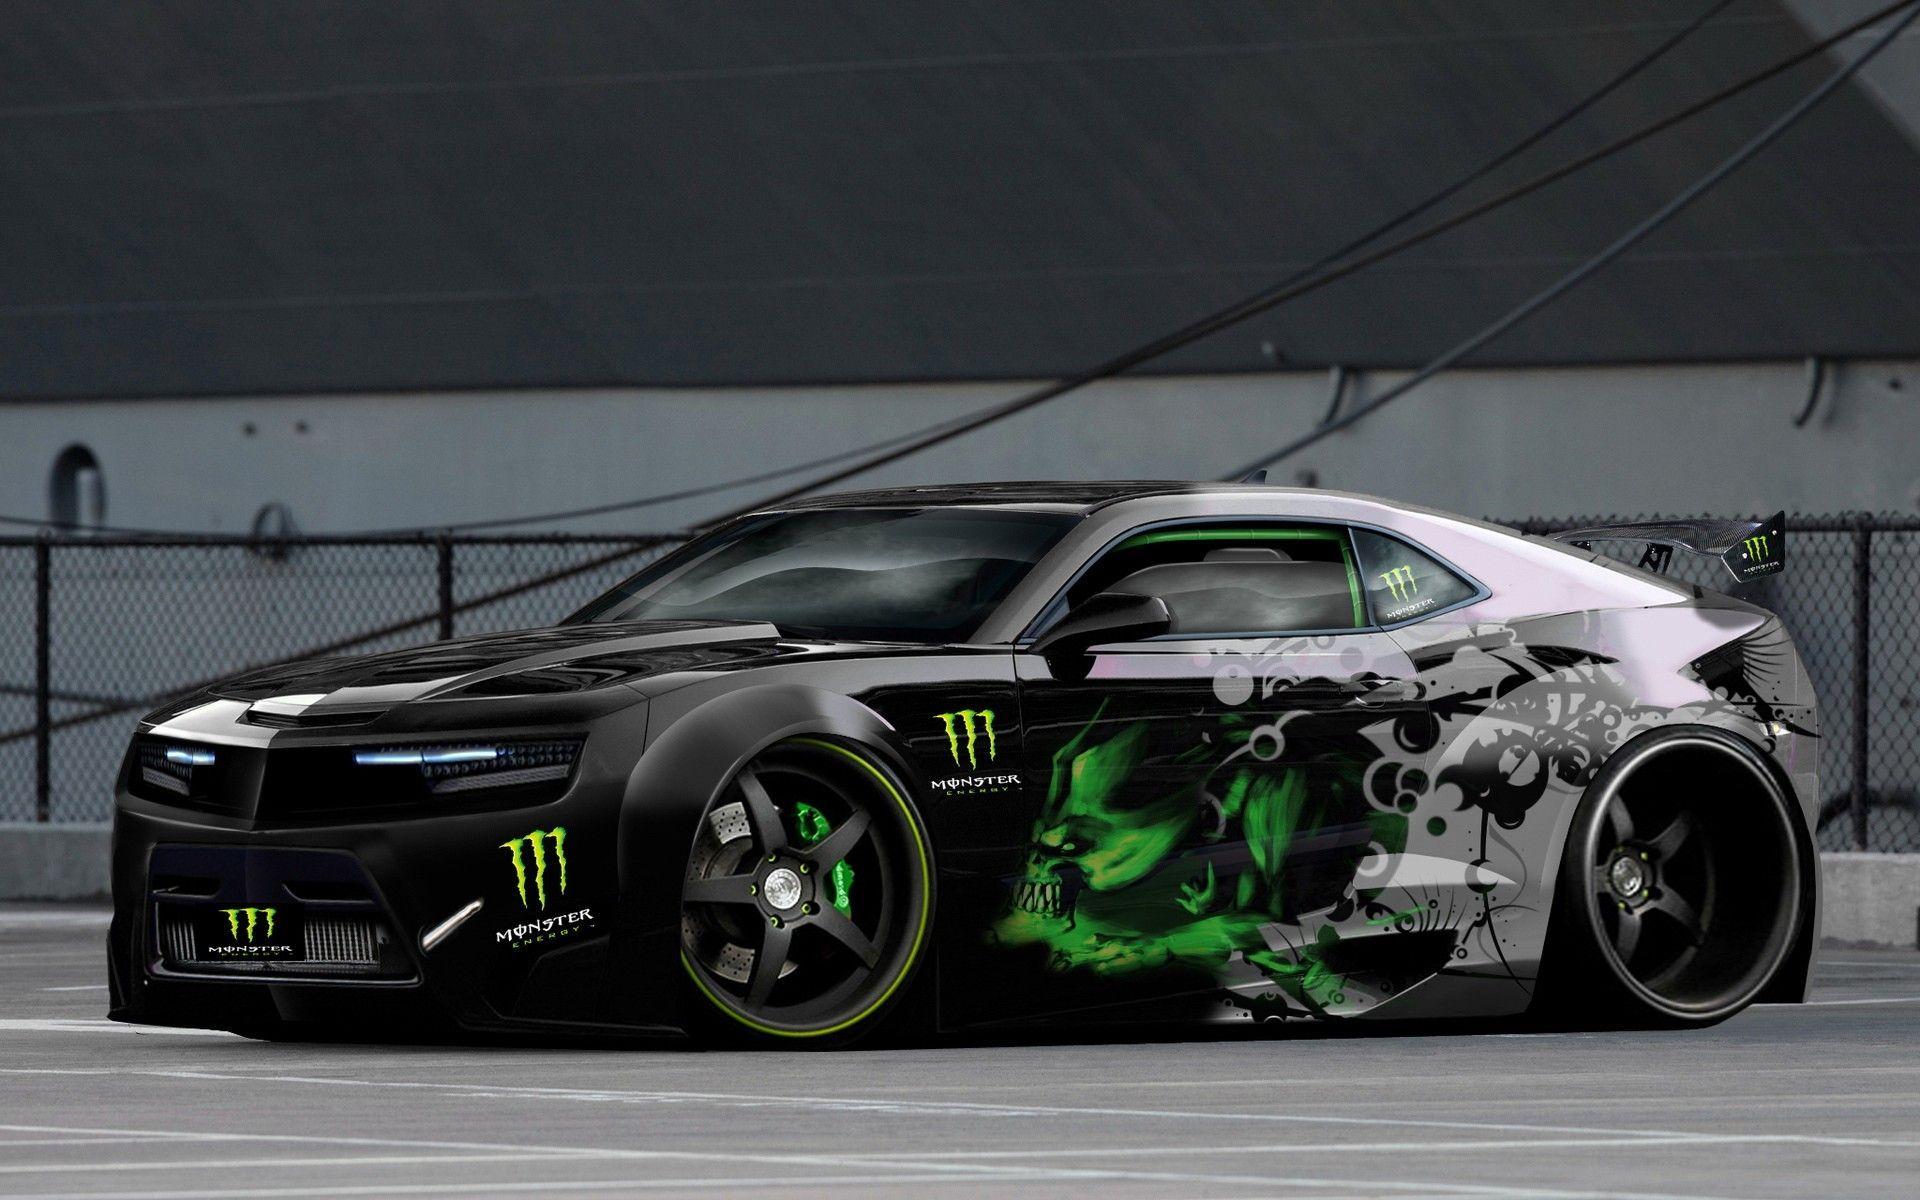 Free Monster Energy Car HD Wallpaper High Quality Background Ol